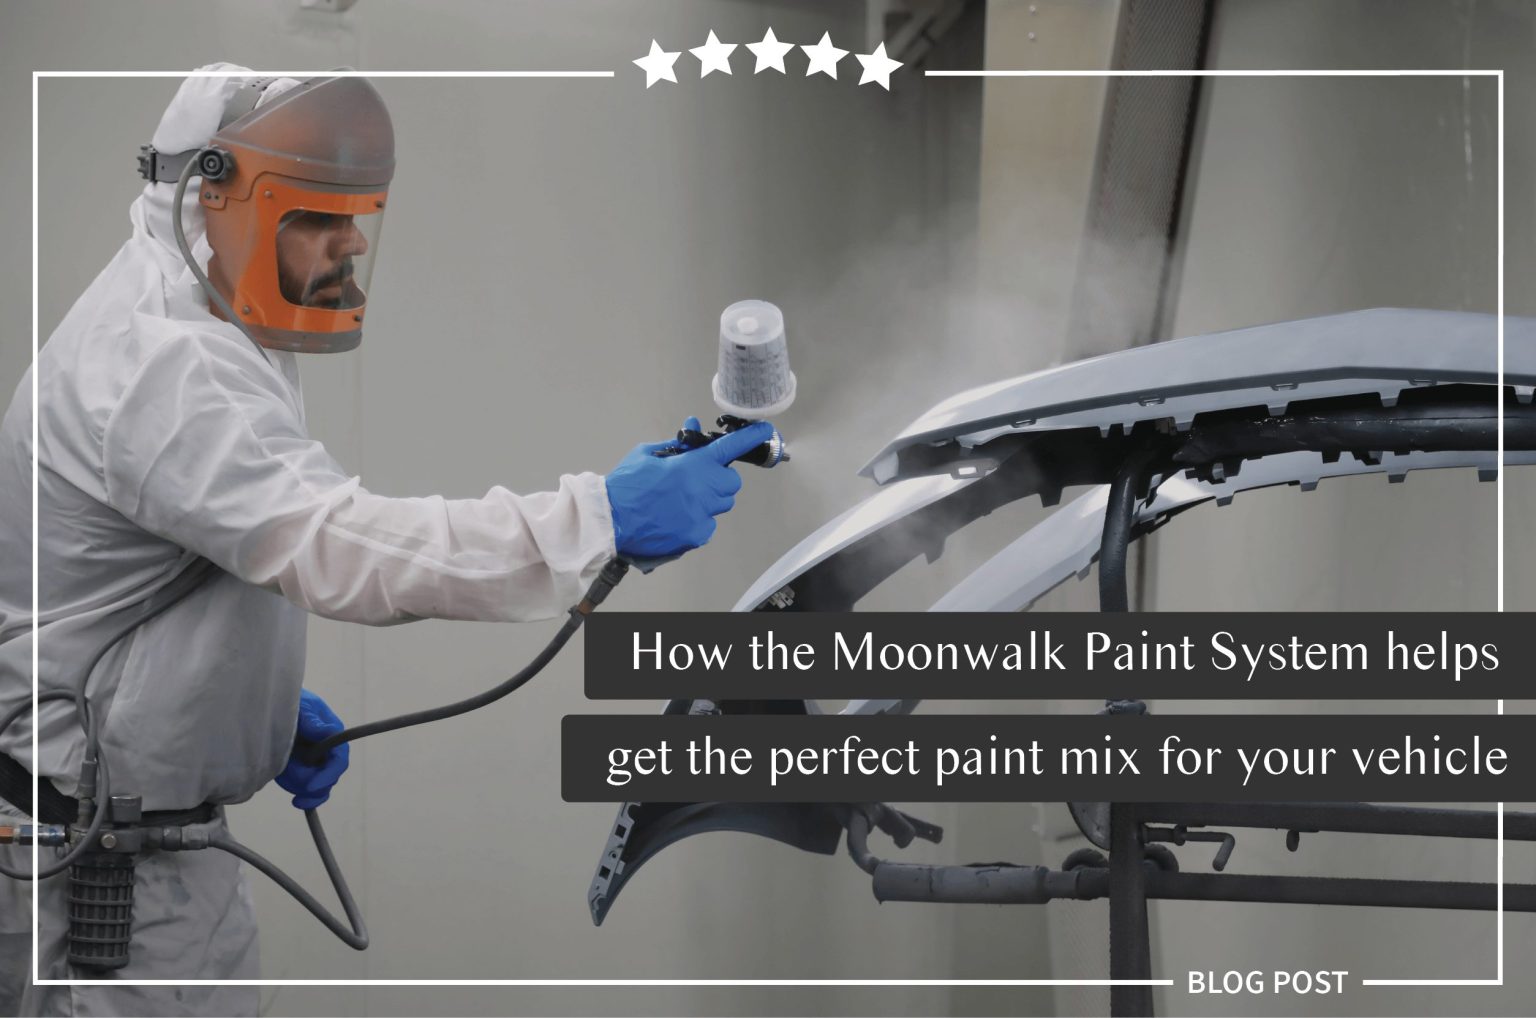 How the Moonwalk Paint System helps get the perfect paint mix for your vehicle